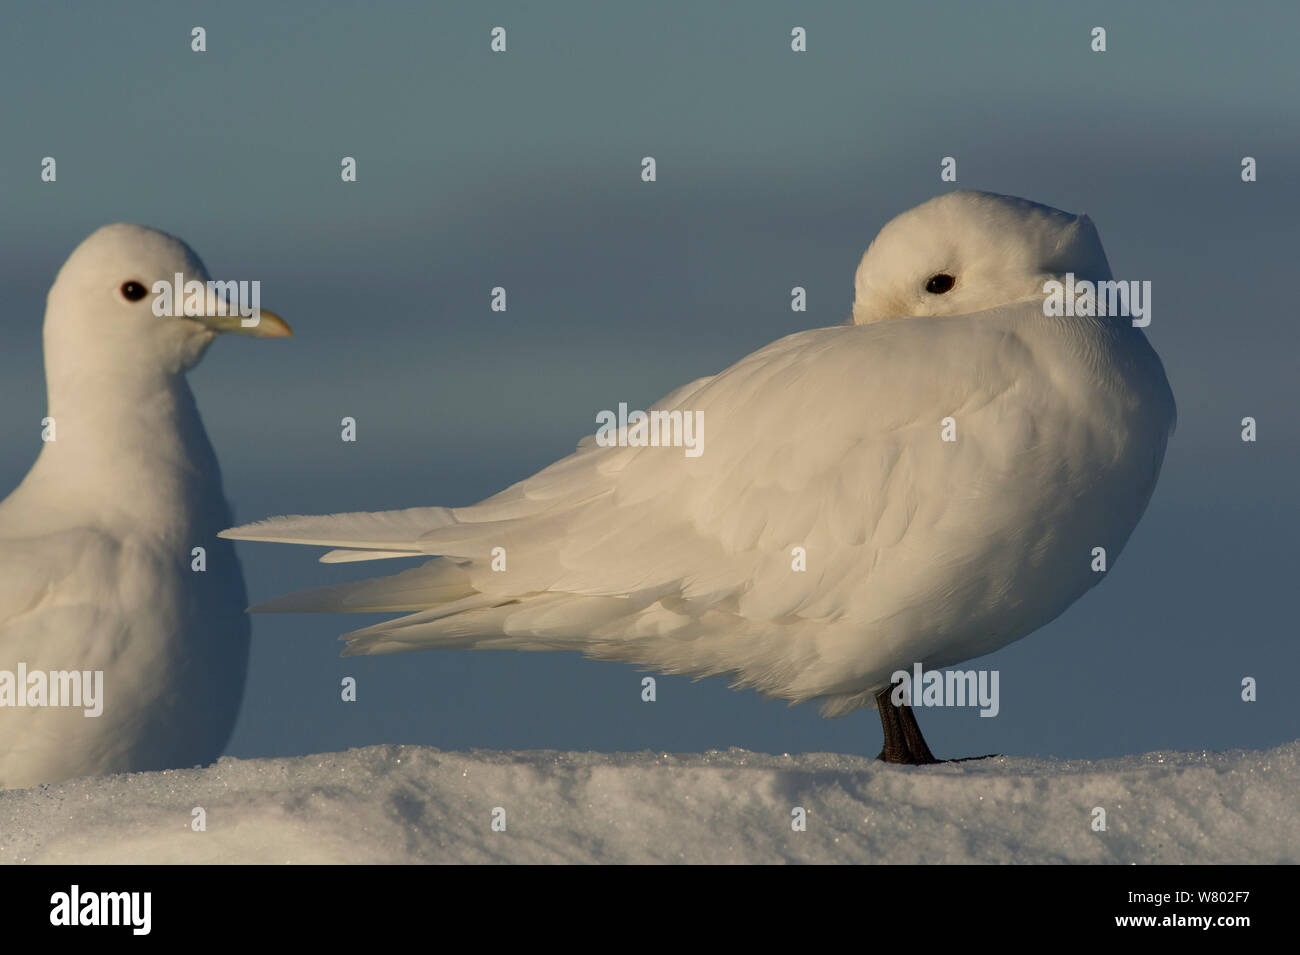 Two Ivory gulls (Pagophila eburnea) standing on snow, one of them is cleaning itself, Svalbard, Norway, Arctic, September Stock Photo